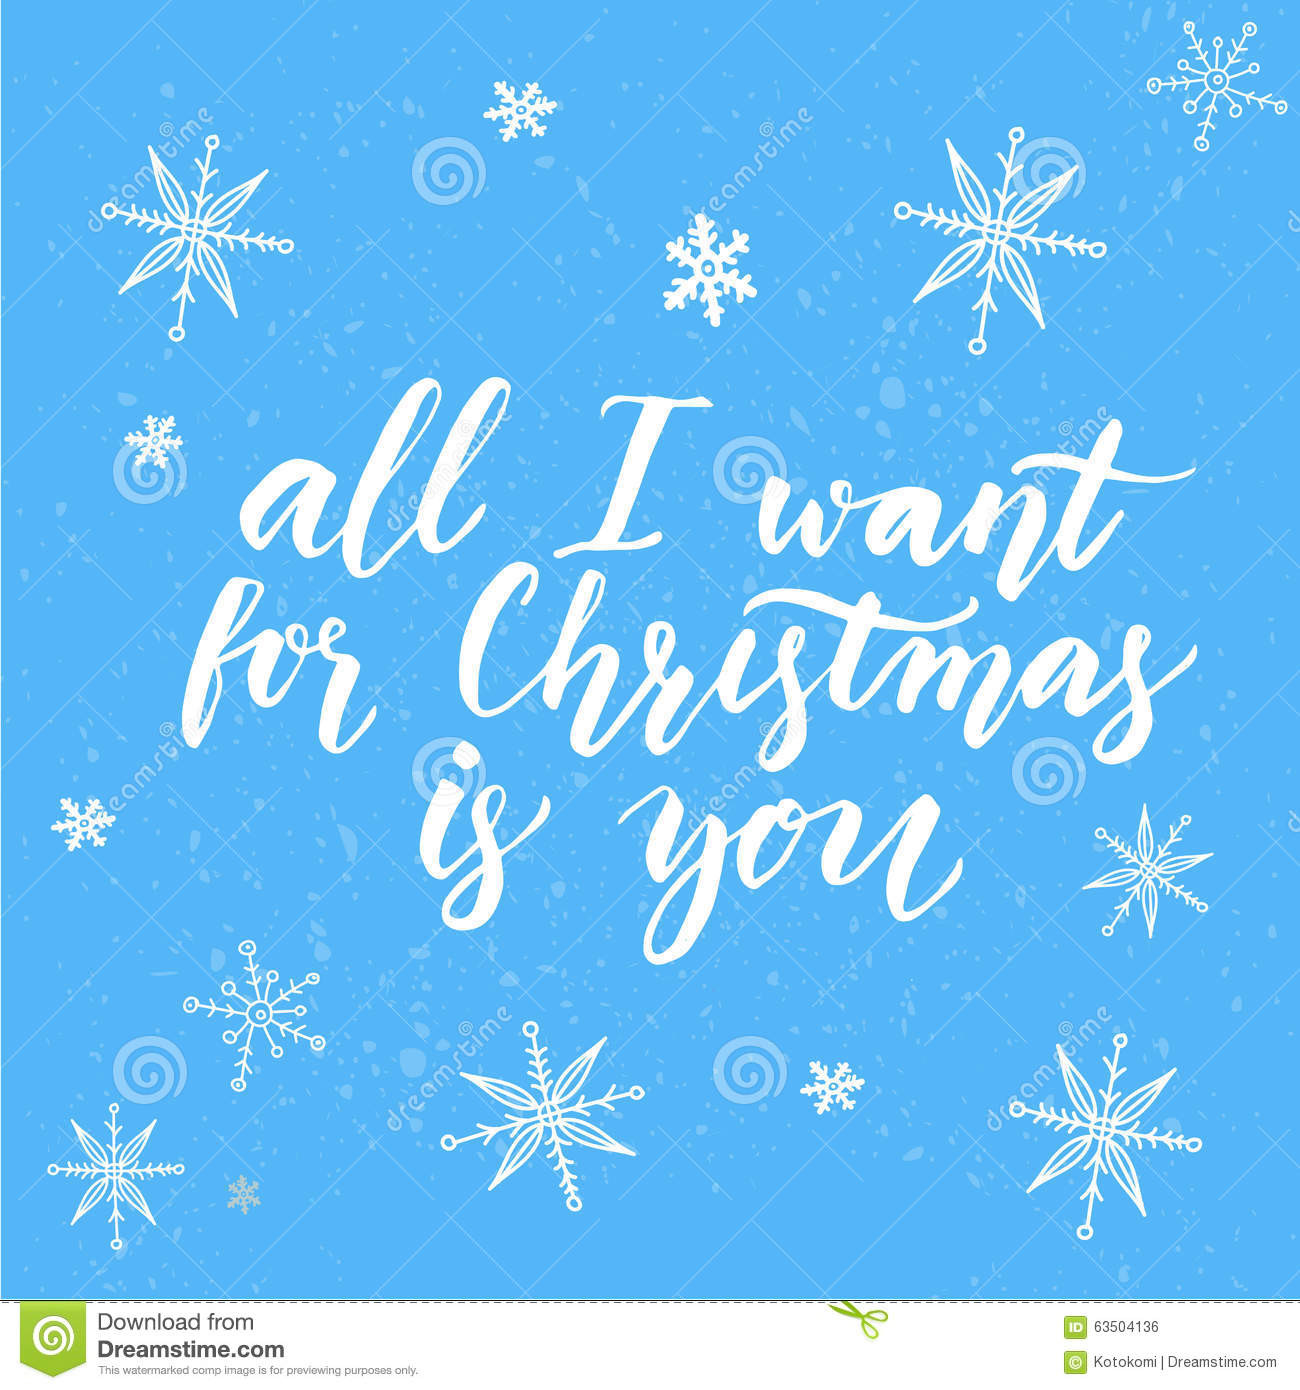 All I Want For Christmas Quotes
 All I Want For Christmas Is You Inspirational Stock